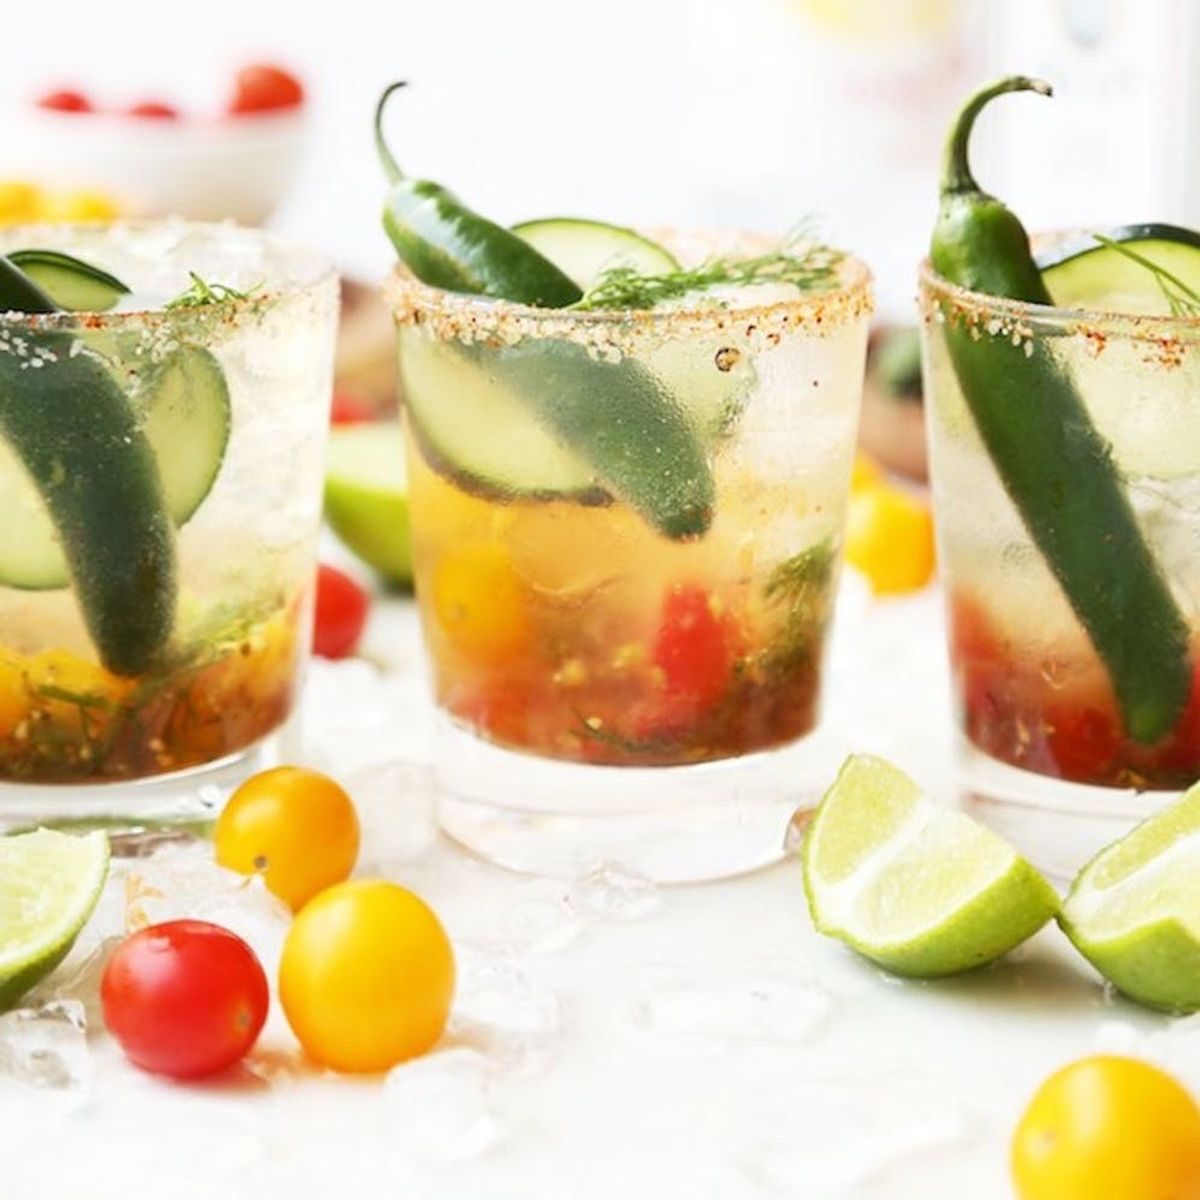 14 Spicy Cocktail Recipes to Add a Kick to Your Weekend